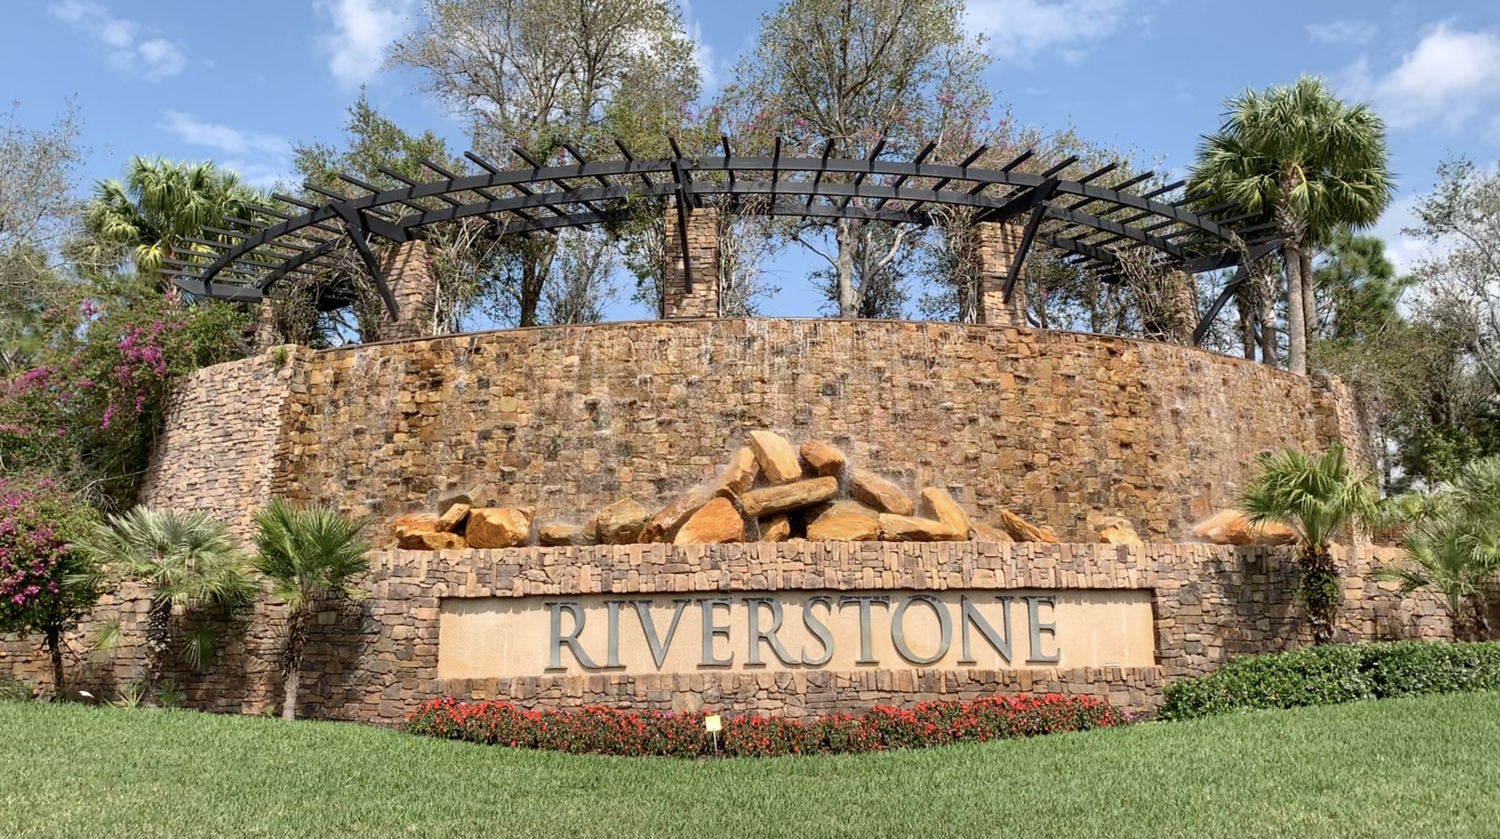 Riverstone Naples Florida : 13 Homes for Sale in Riverstone, Naples FL —  Janet Berry Luxury Home Team